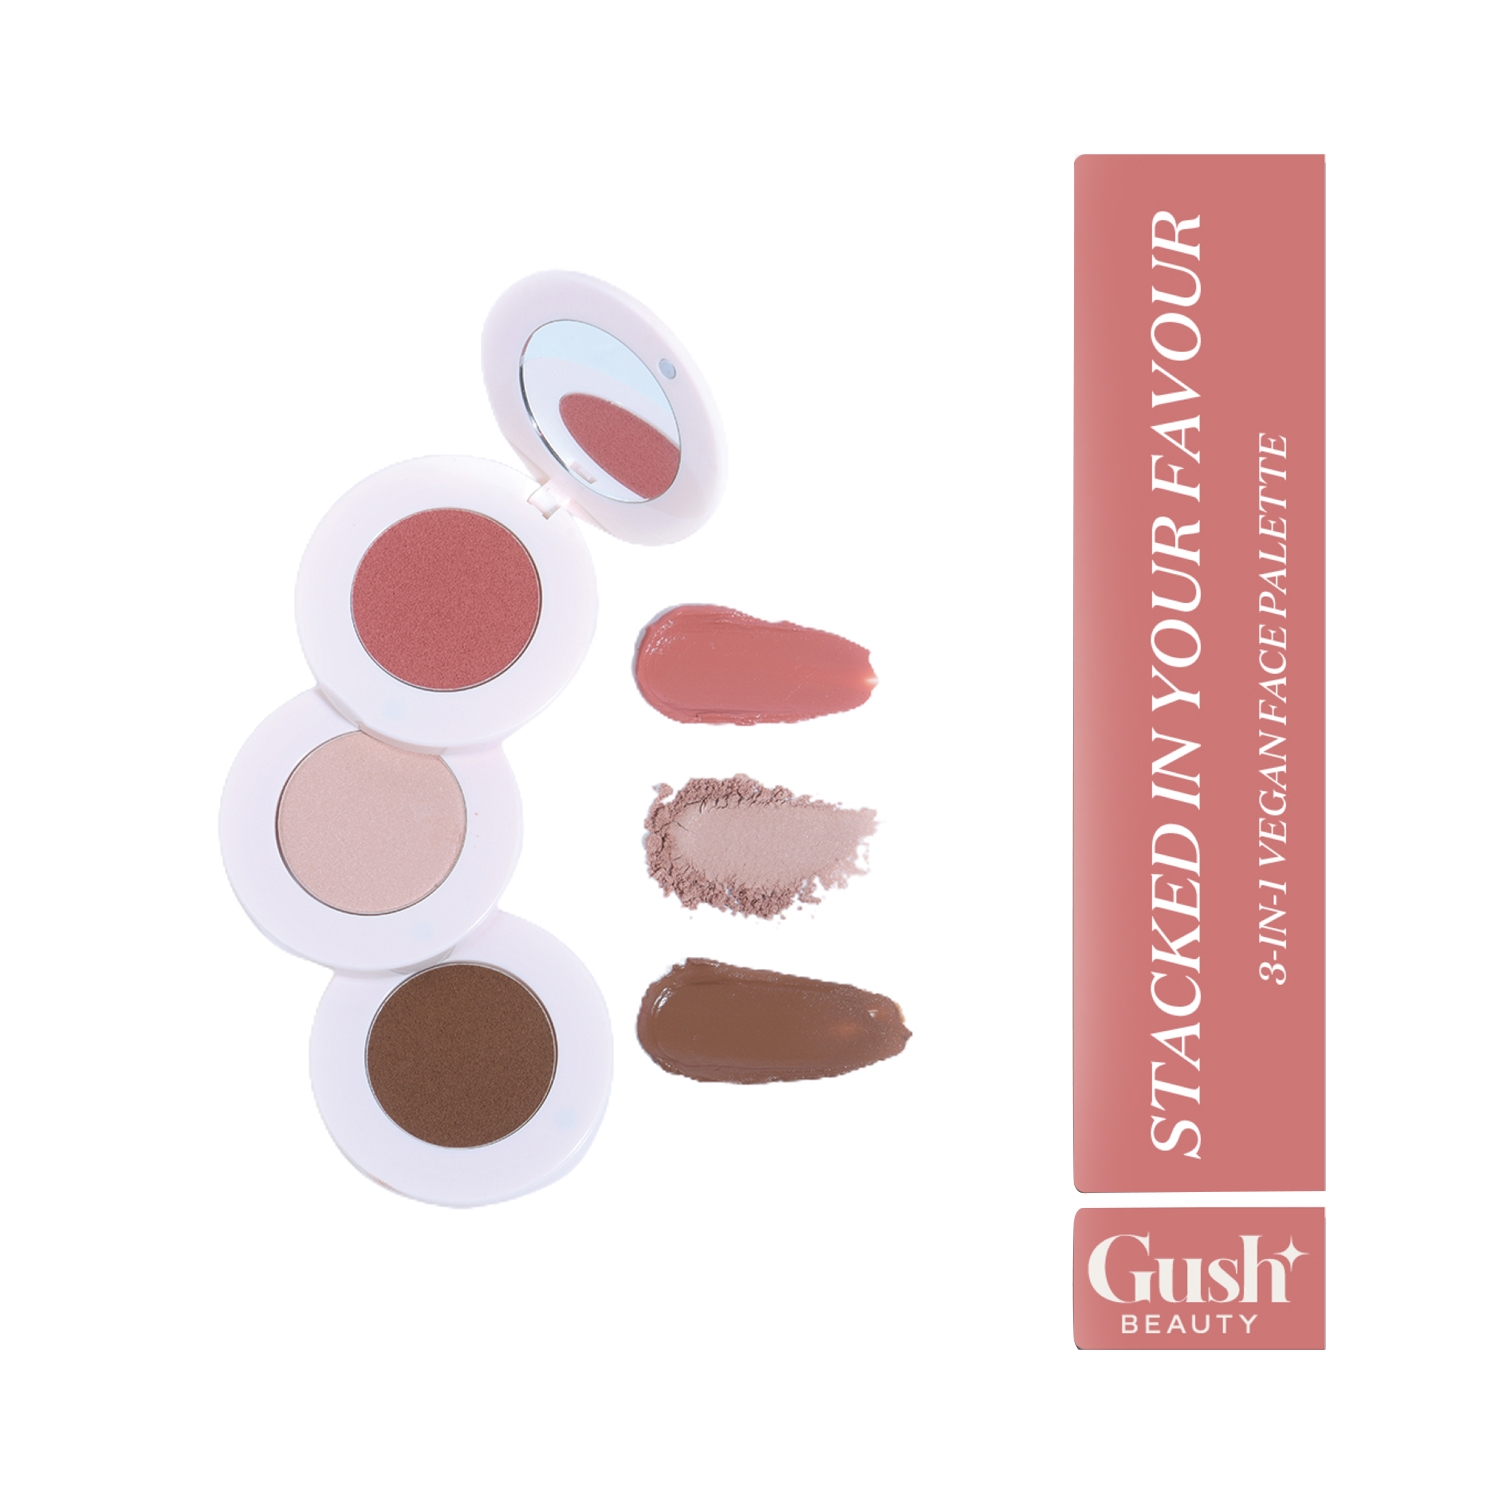 Gush Beauty | Gush Beauty Stacked In Your Favour Multi-Purpose Face Palette - Weekdays To Weekend (6.9g)